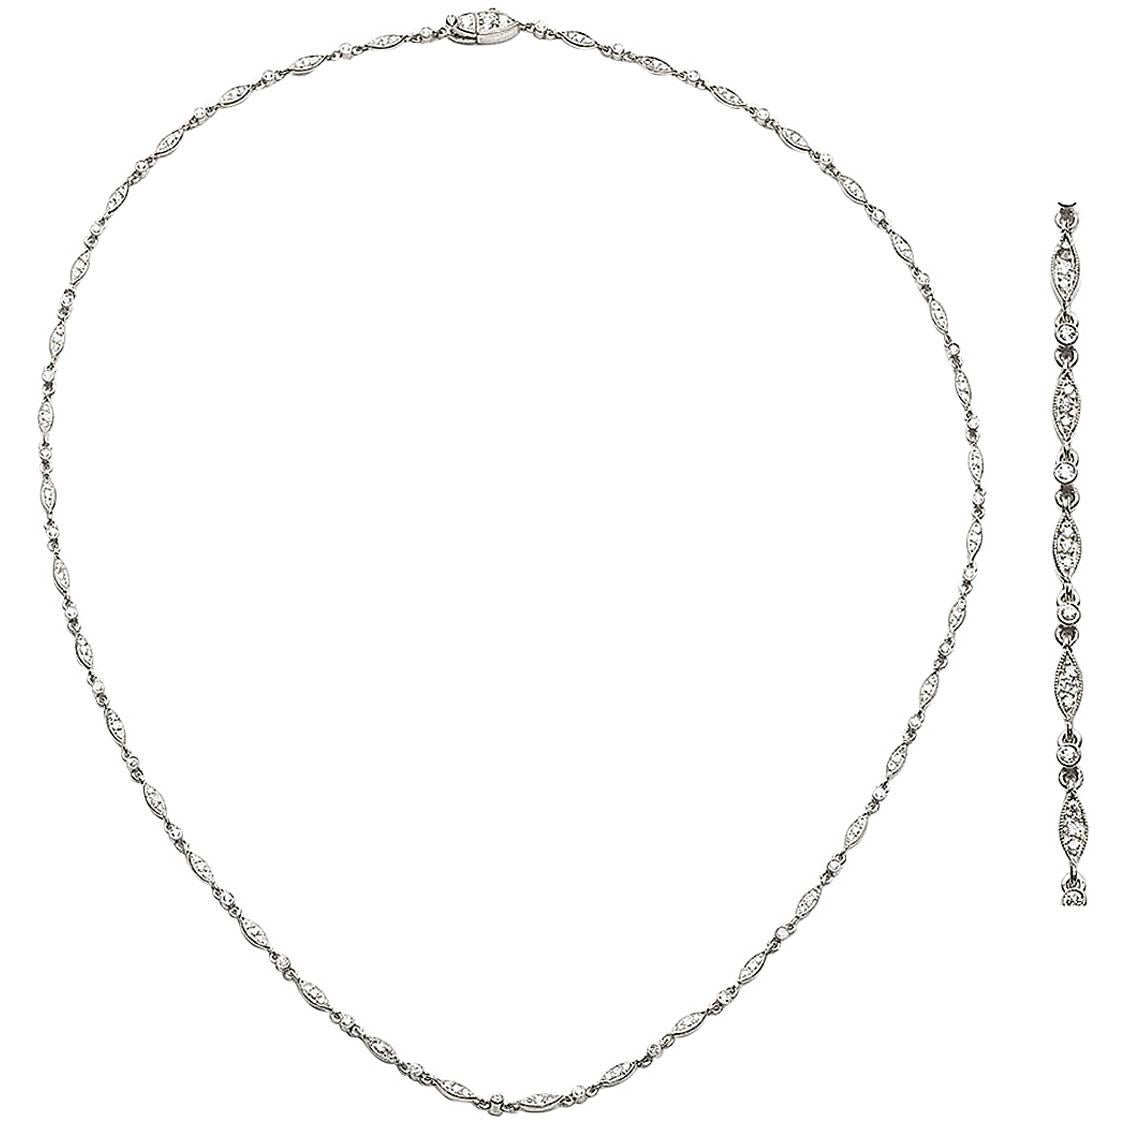 A modern diamond  necklace, with alternating navette shaped links and rub over settings, set with eight-cut and Edwardian-cut diamonds, mounted in platinum, estimated total diamond weight 0.70ct